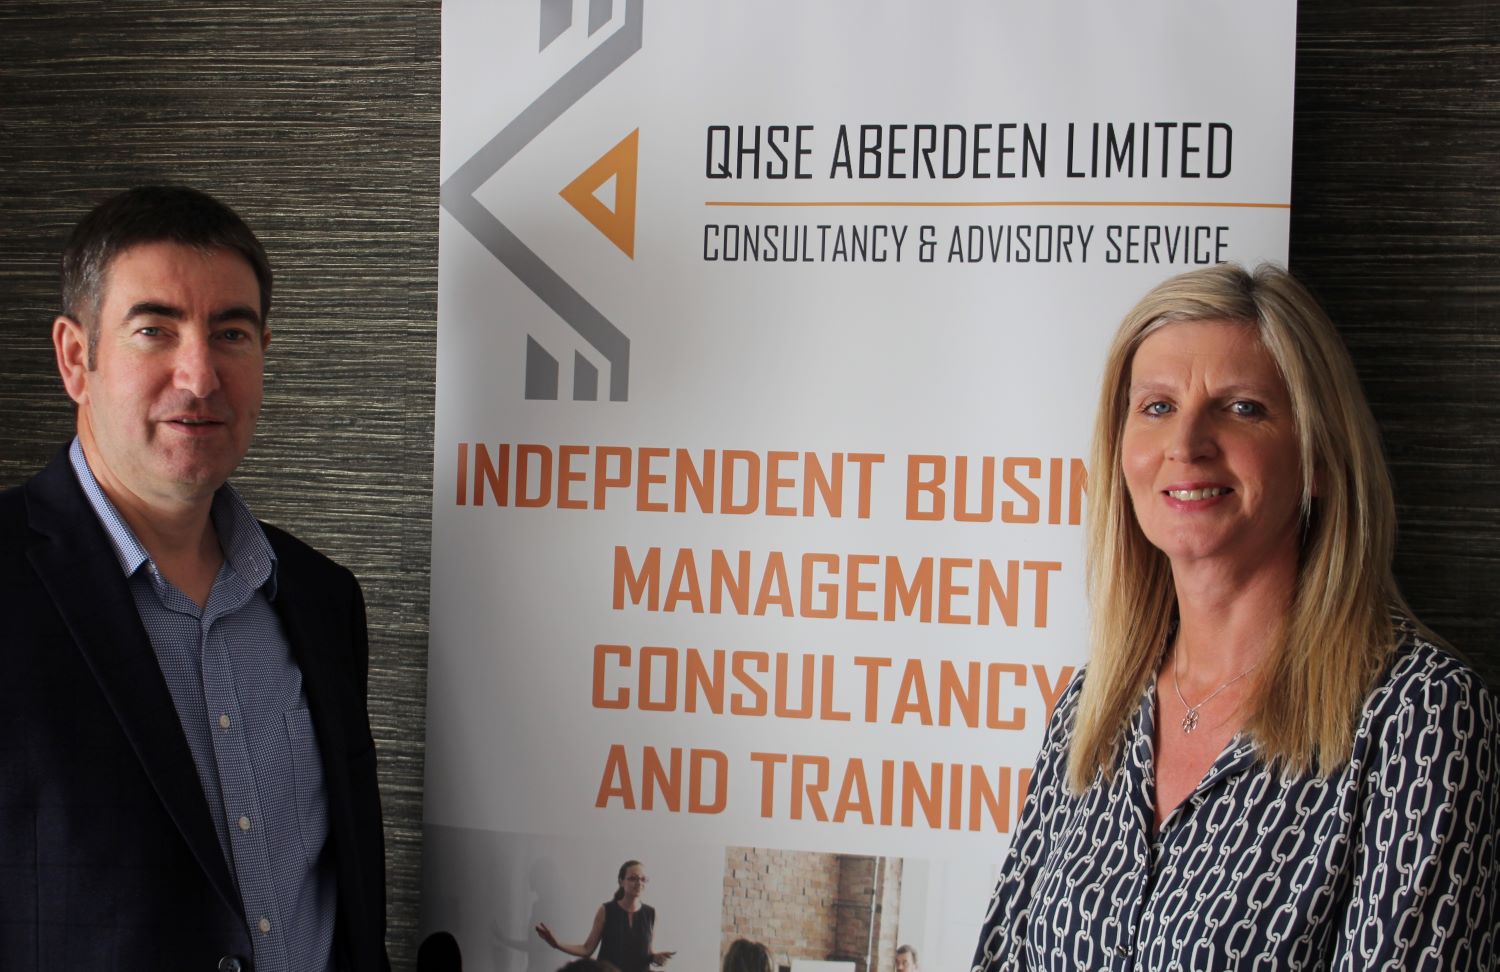 MEMBER NEWS: Global certification award a step change for QHSE Aberdeen